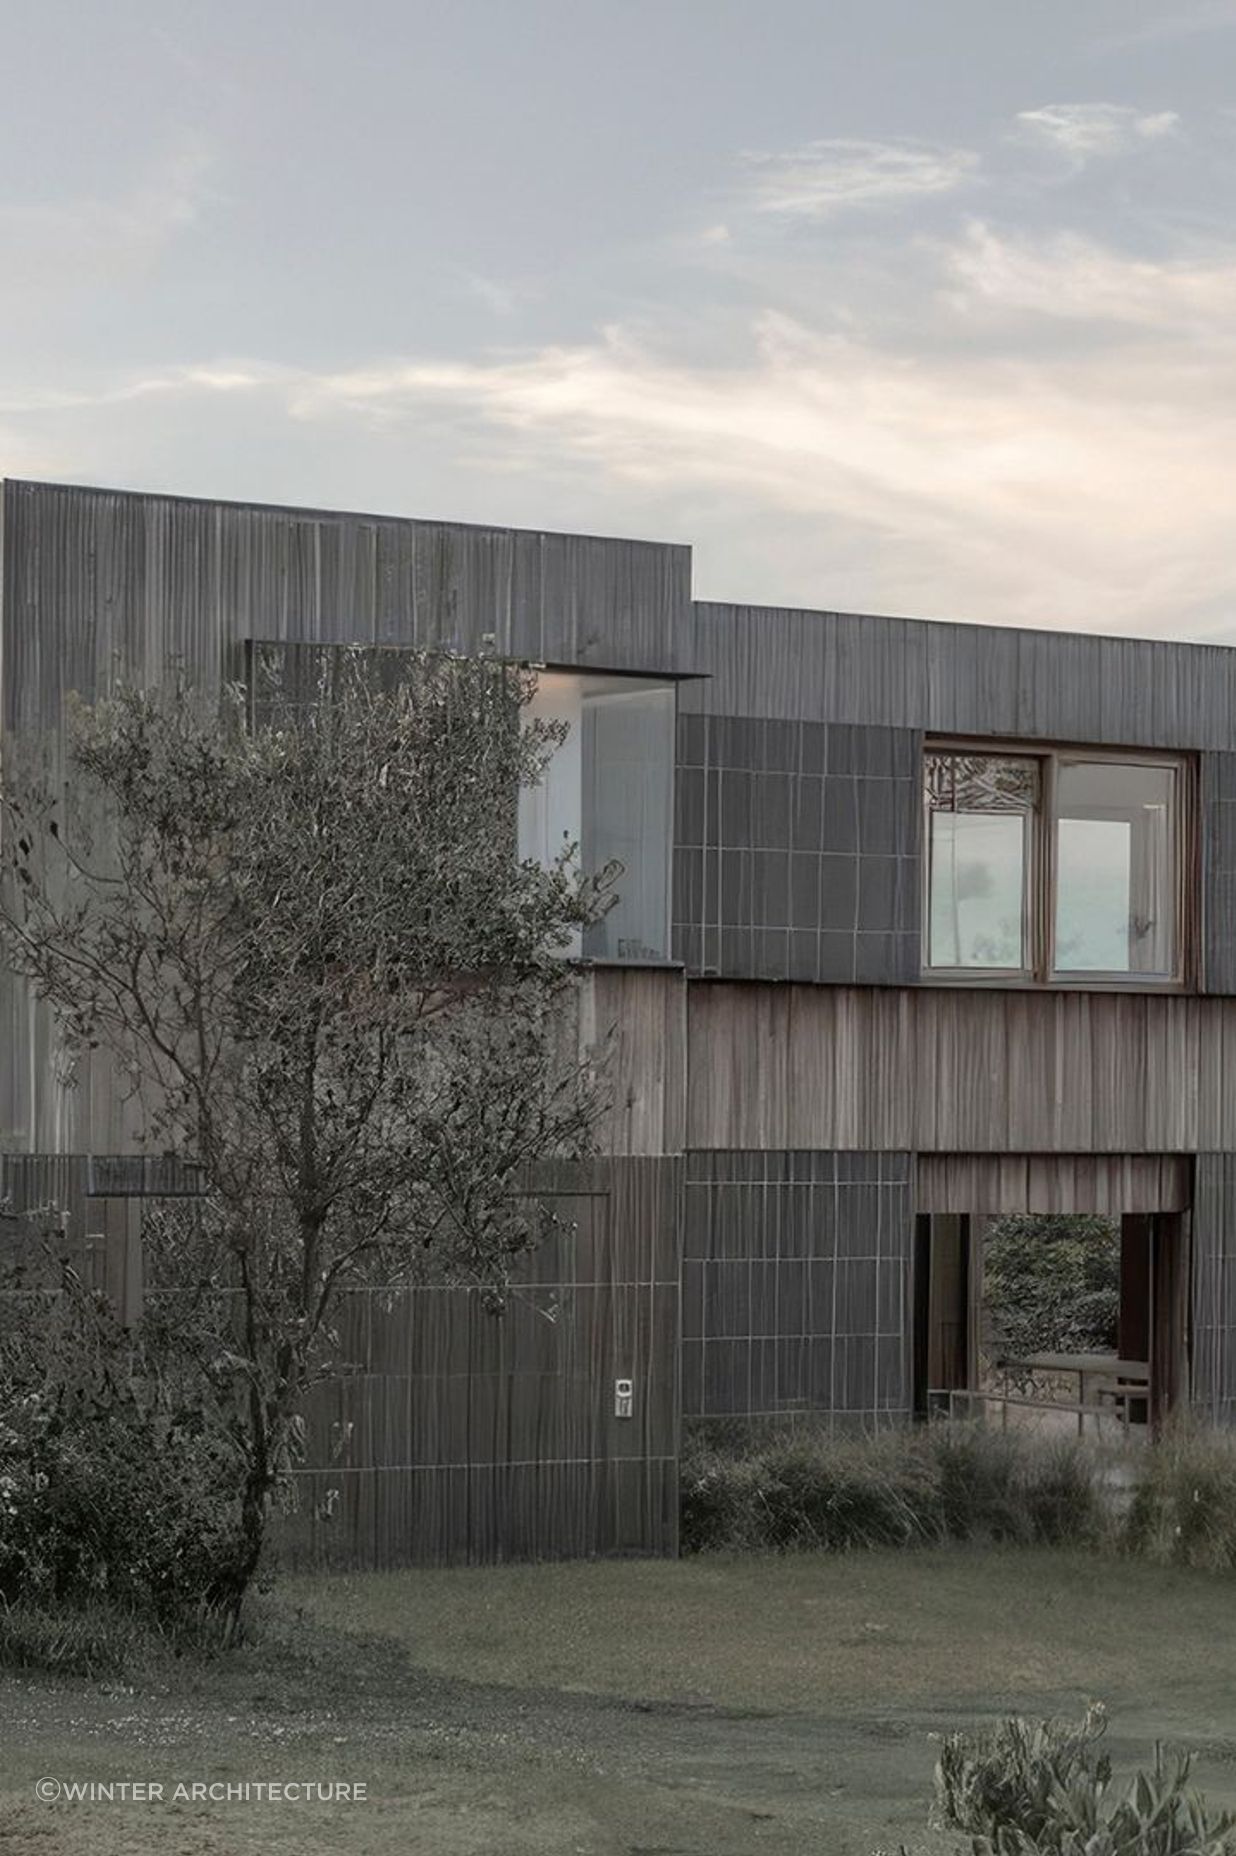 The weatherboard cladding blends with the surrounding grasslands.